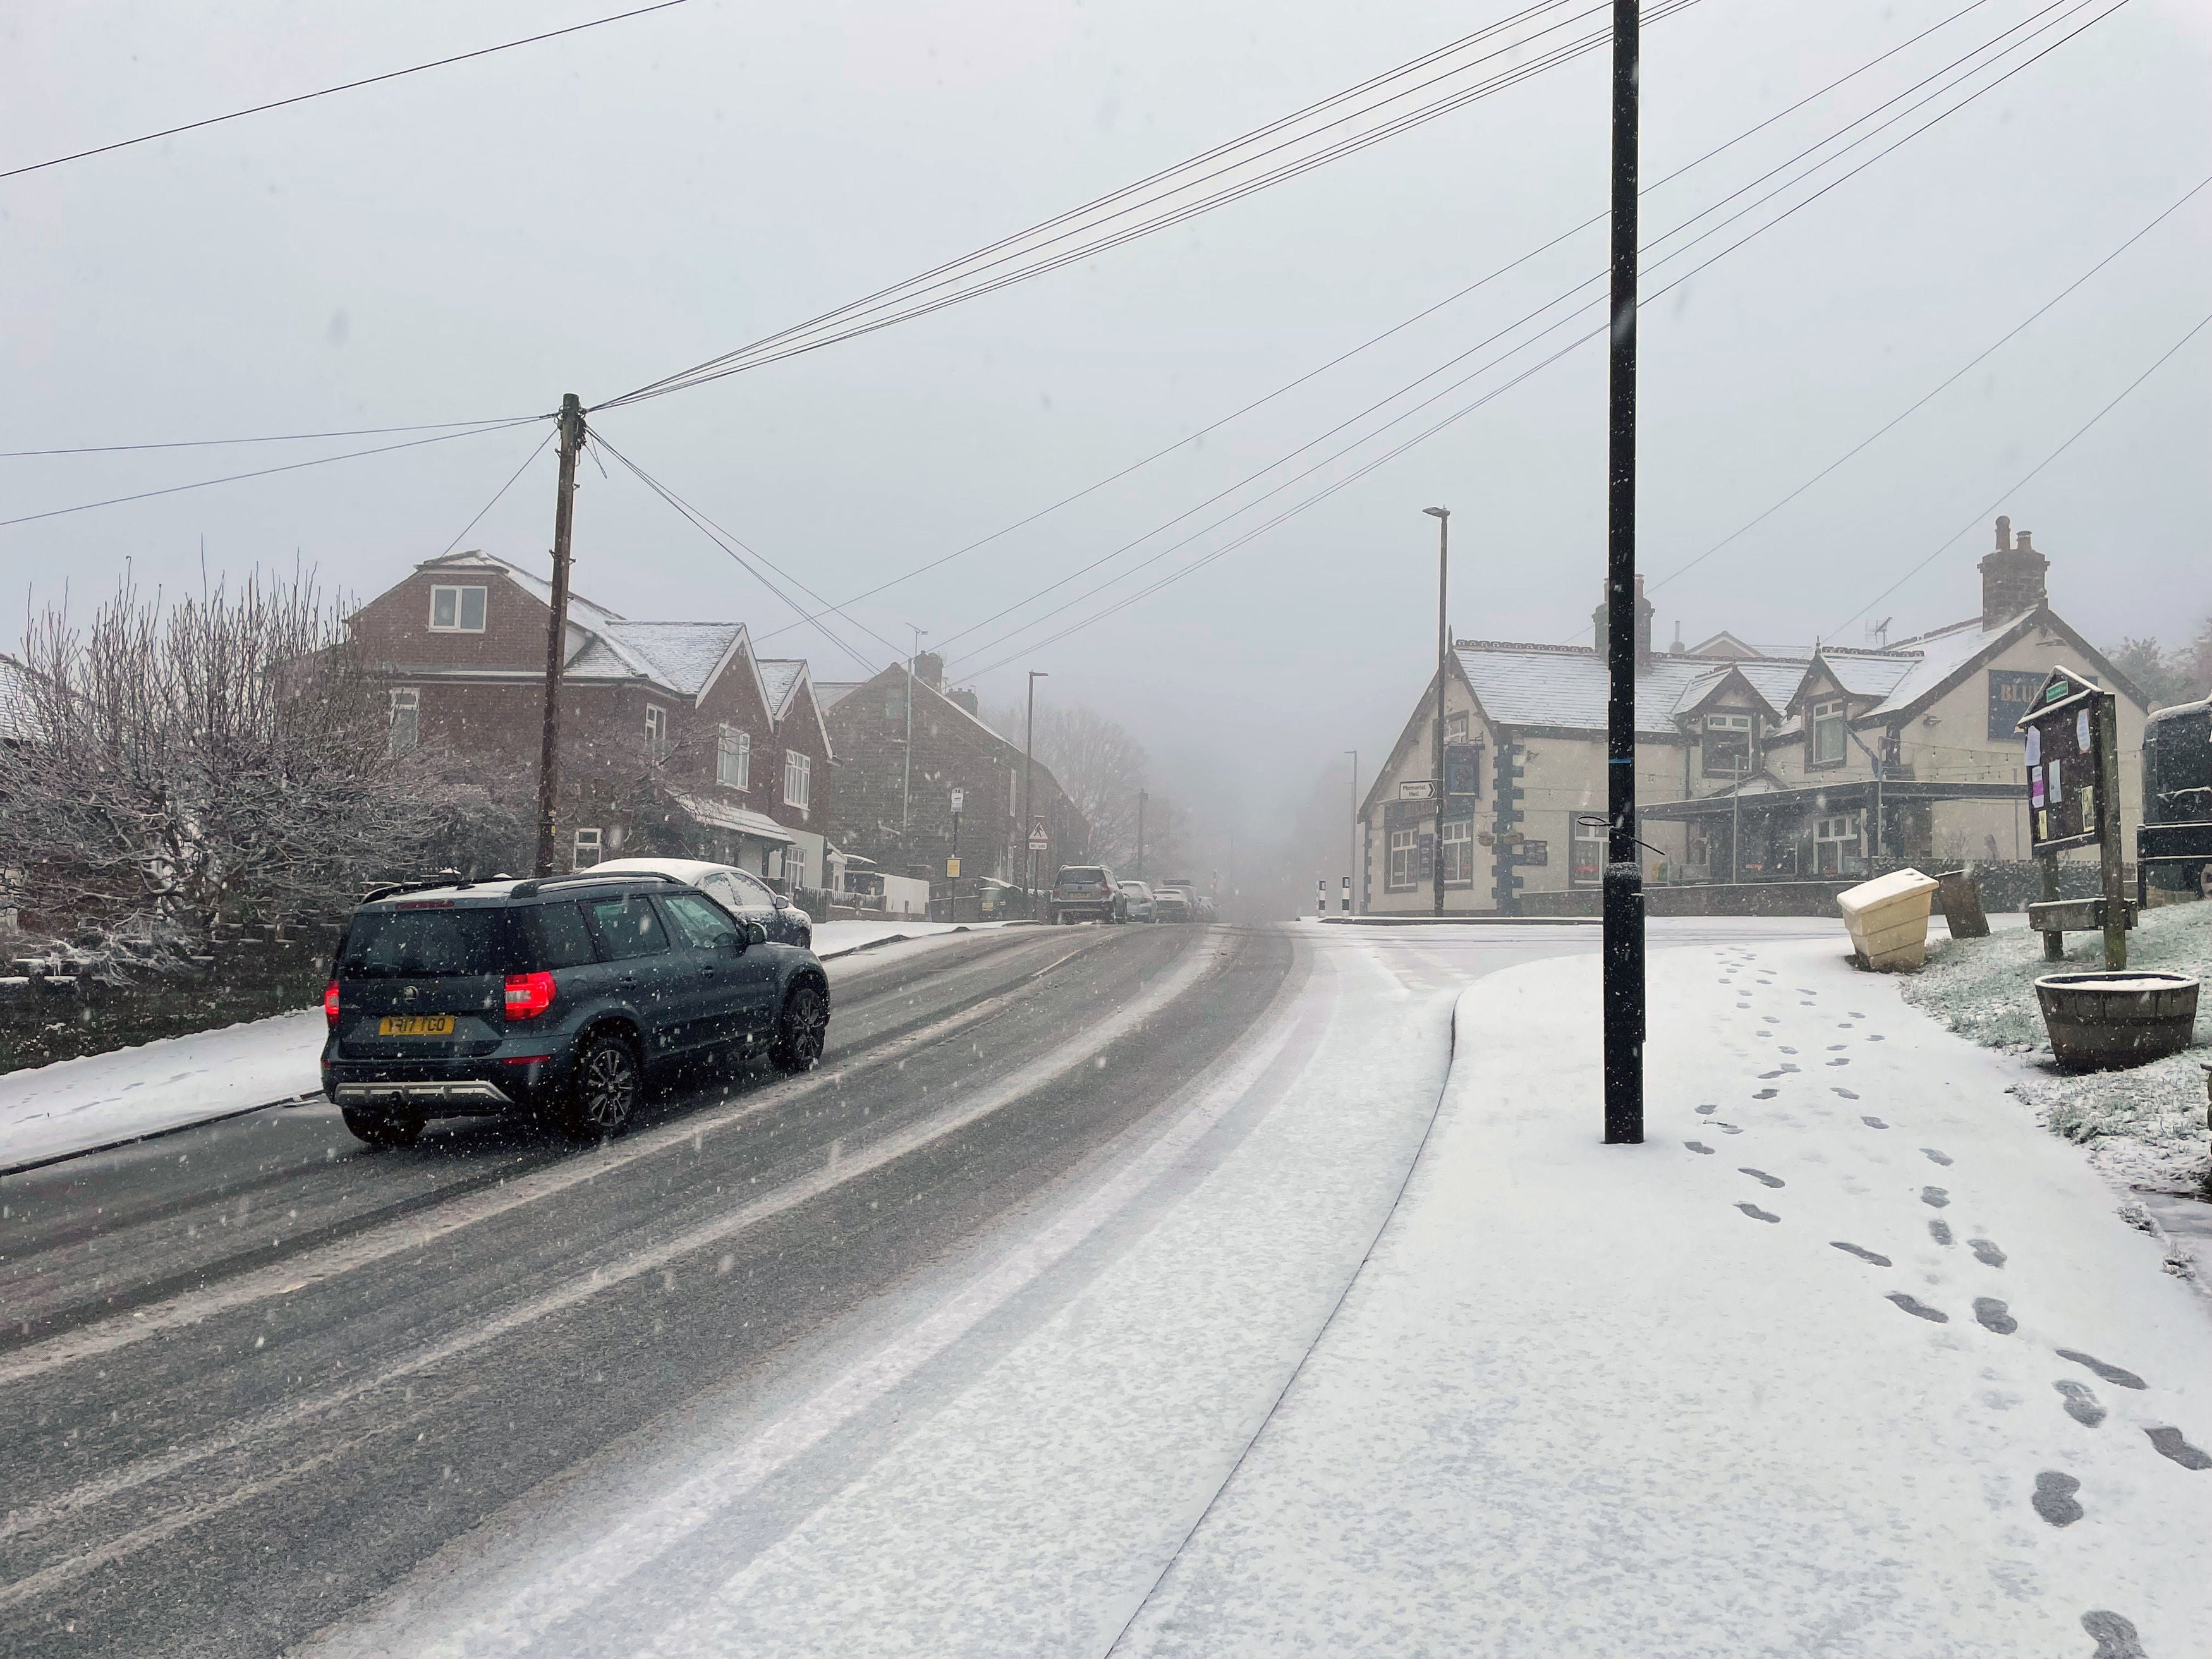 Snow in Worrall in South Yorkshire.